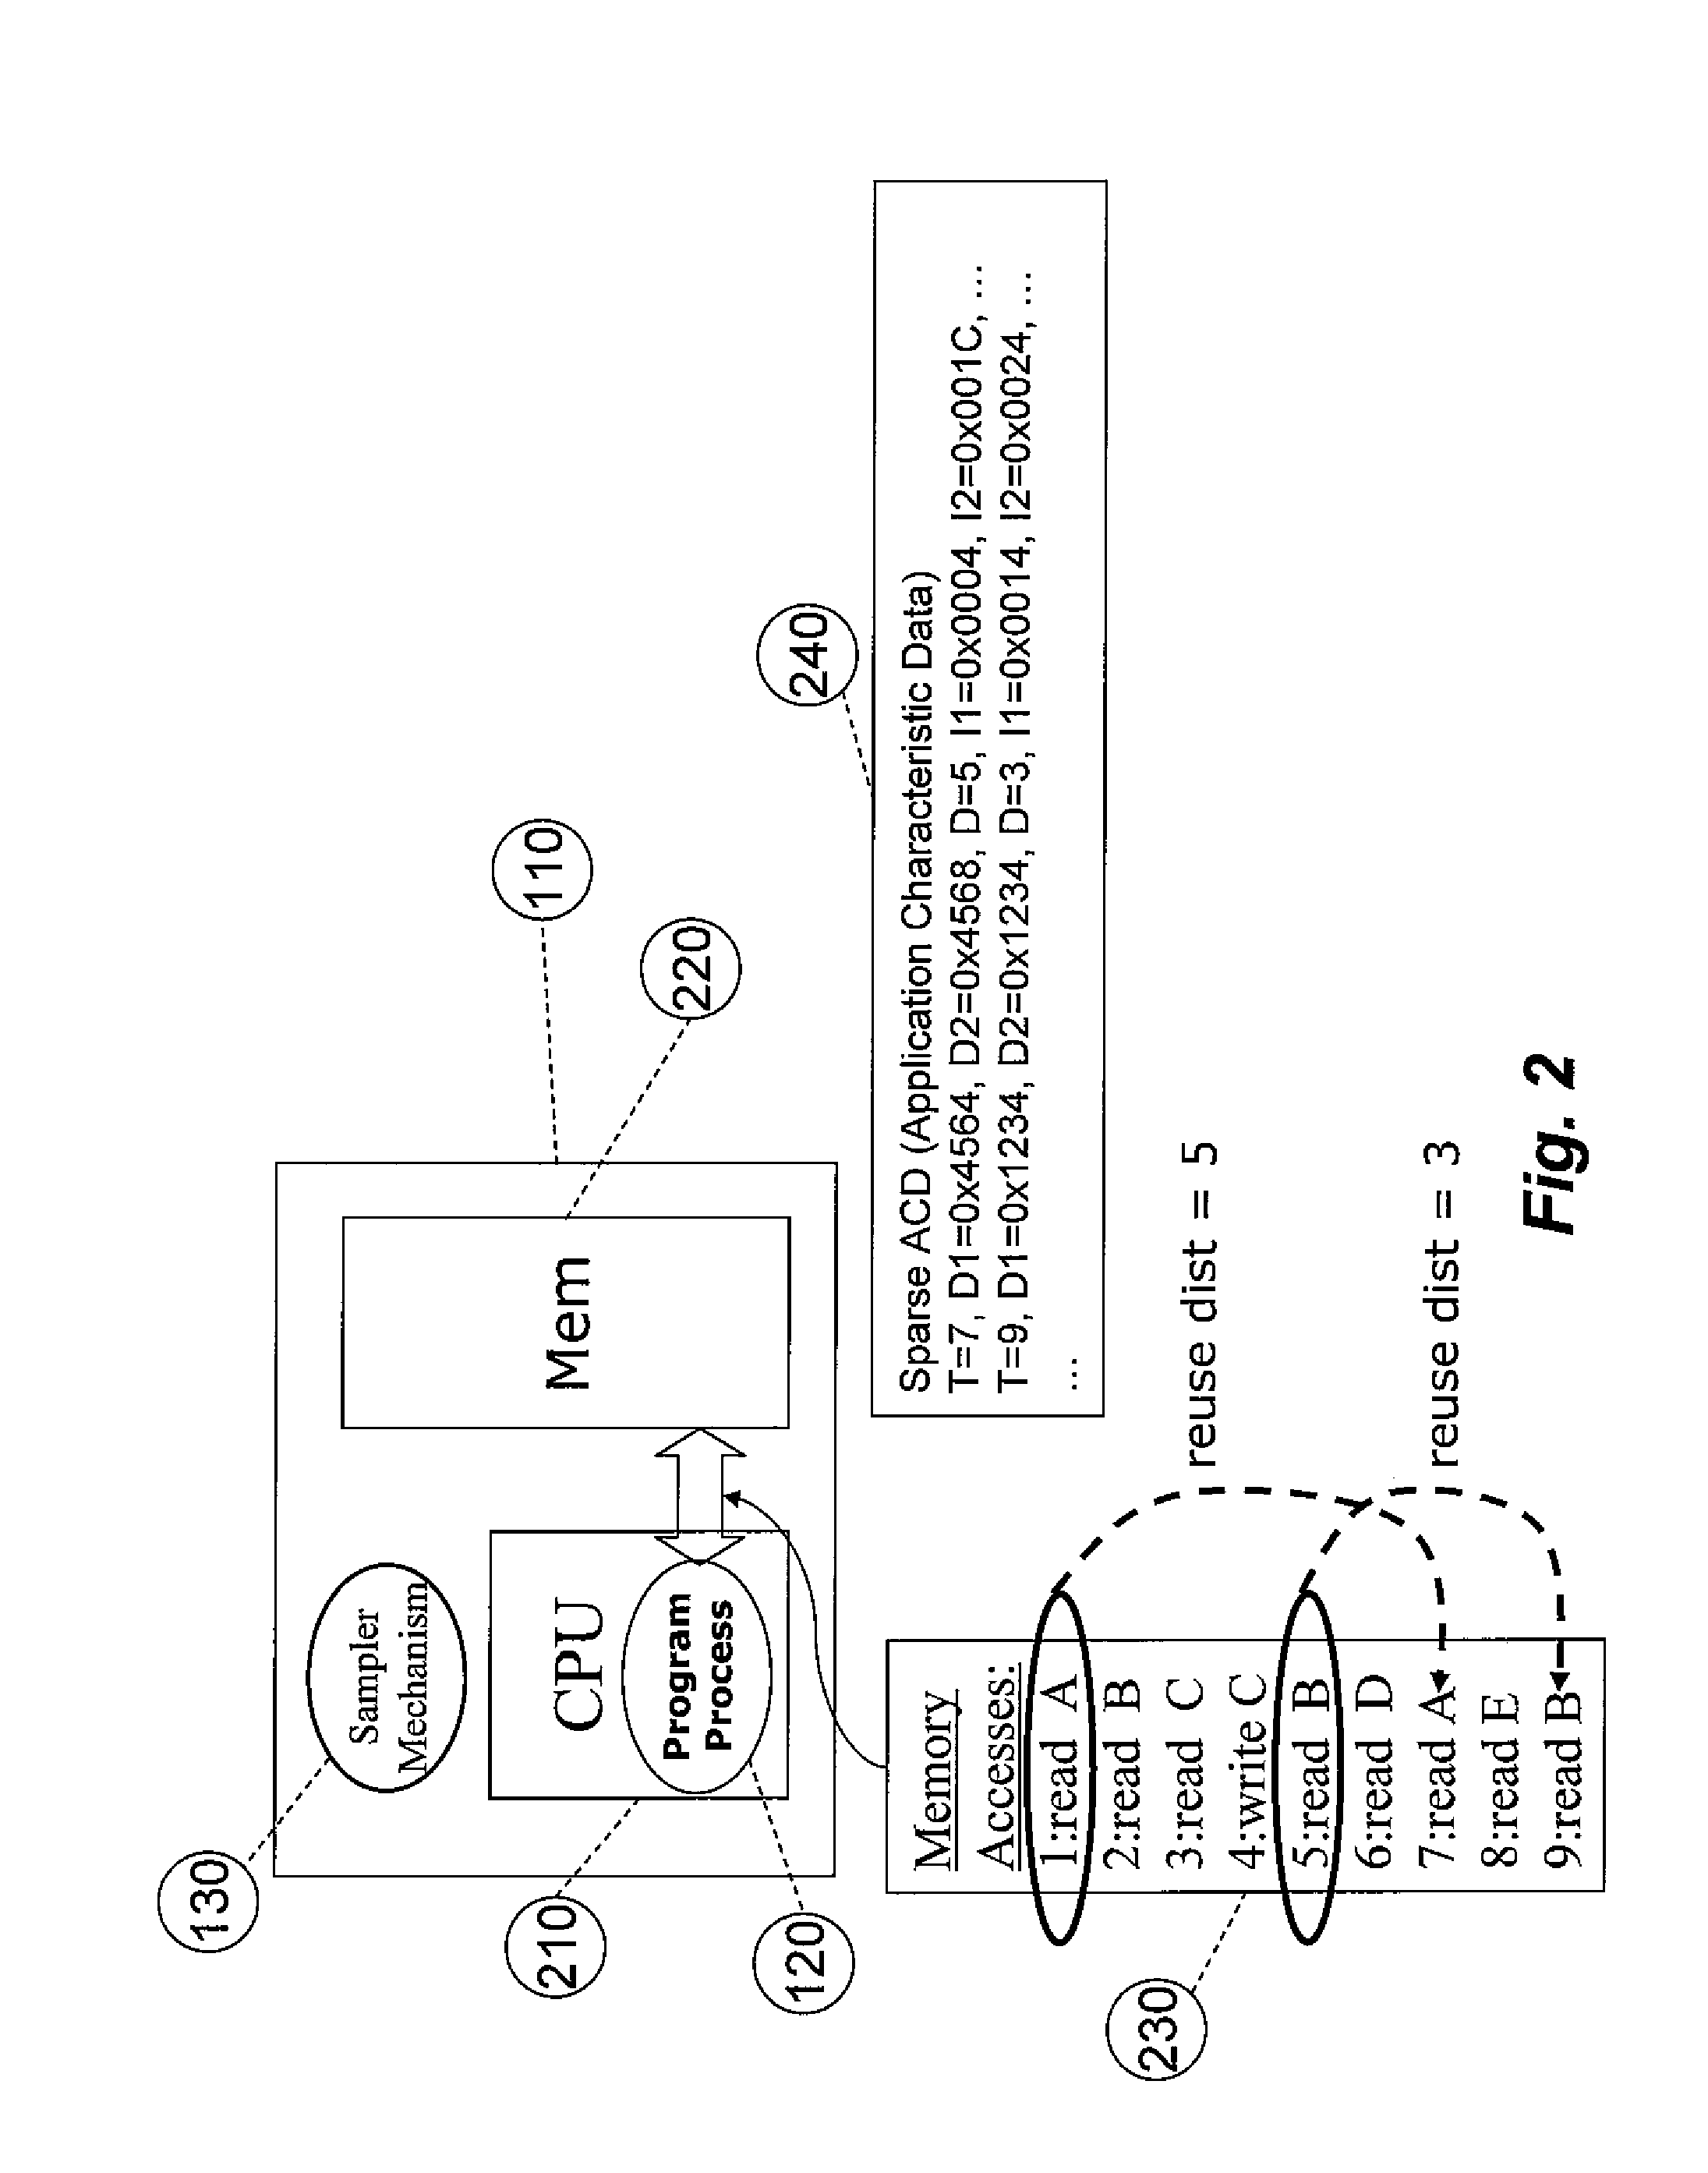 System for and method of capturing application characteristics data from a computer system and modeling target system